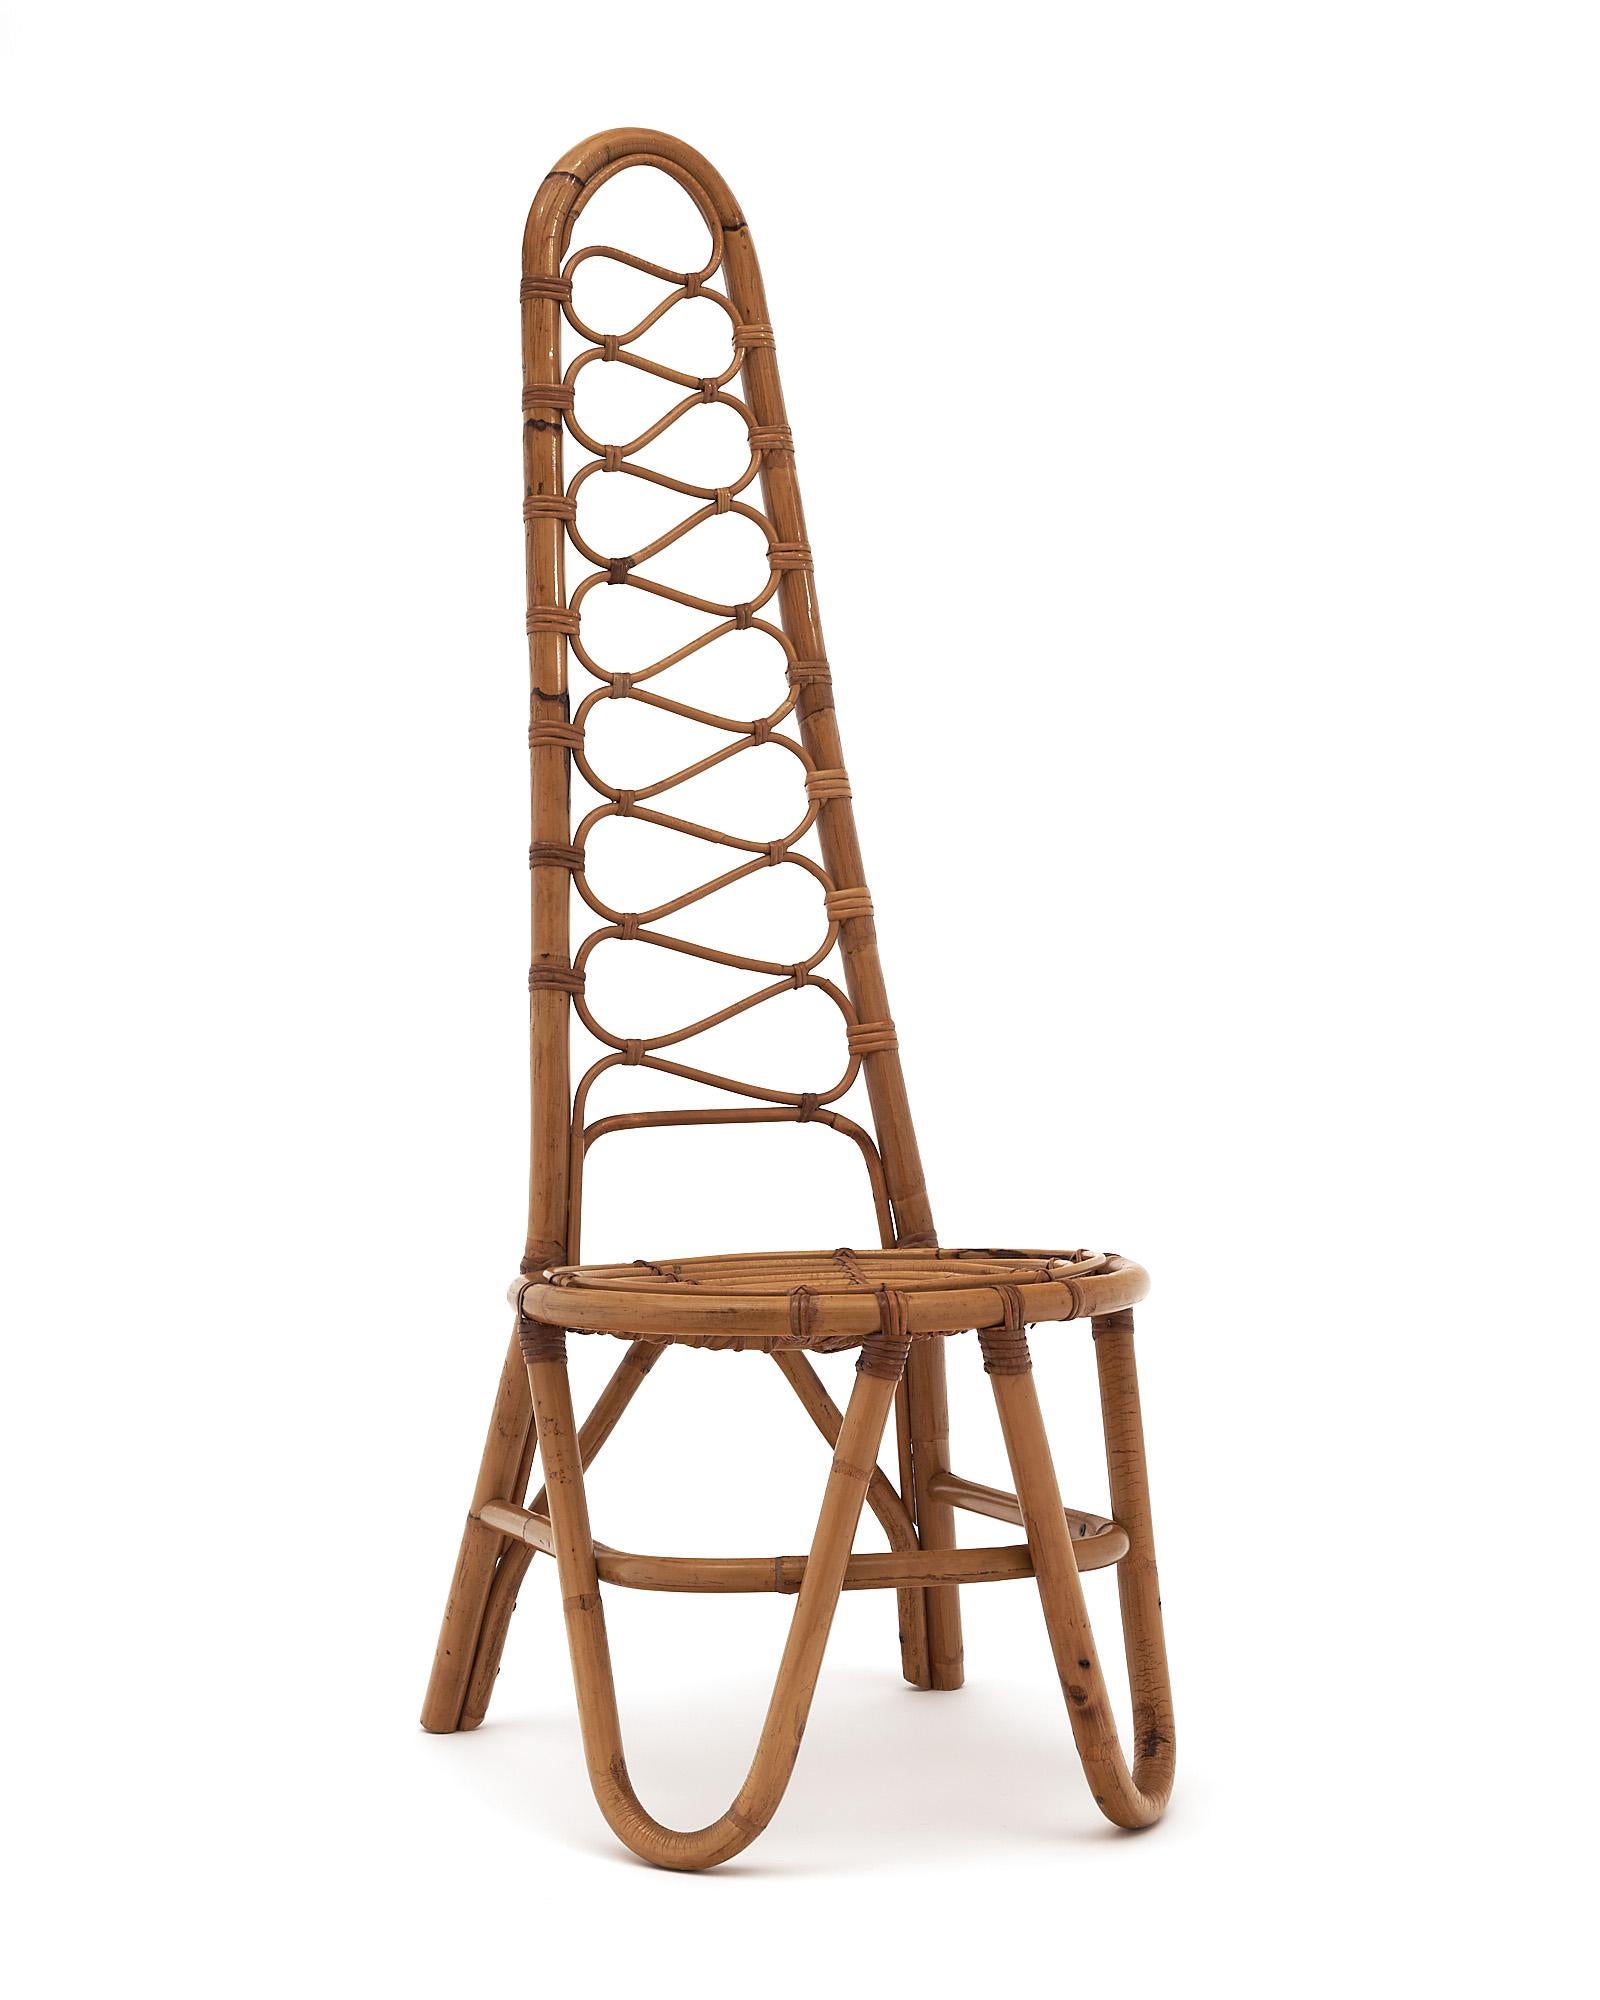 Vintage side chair from France made of bamboo. We love this unique design and proportions of this striking piece.